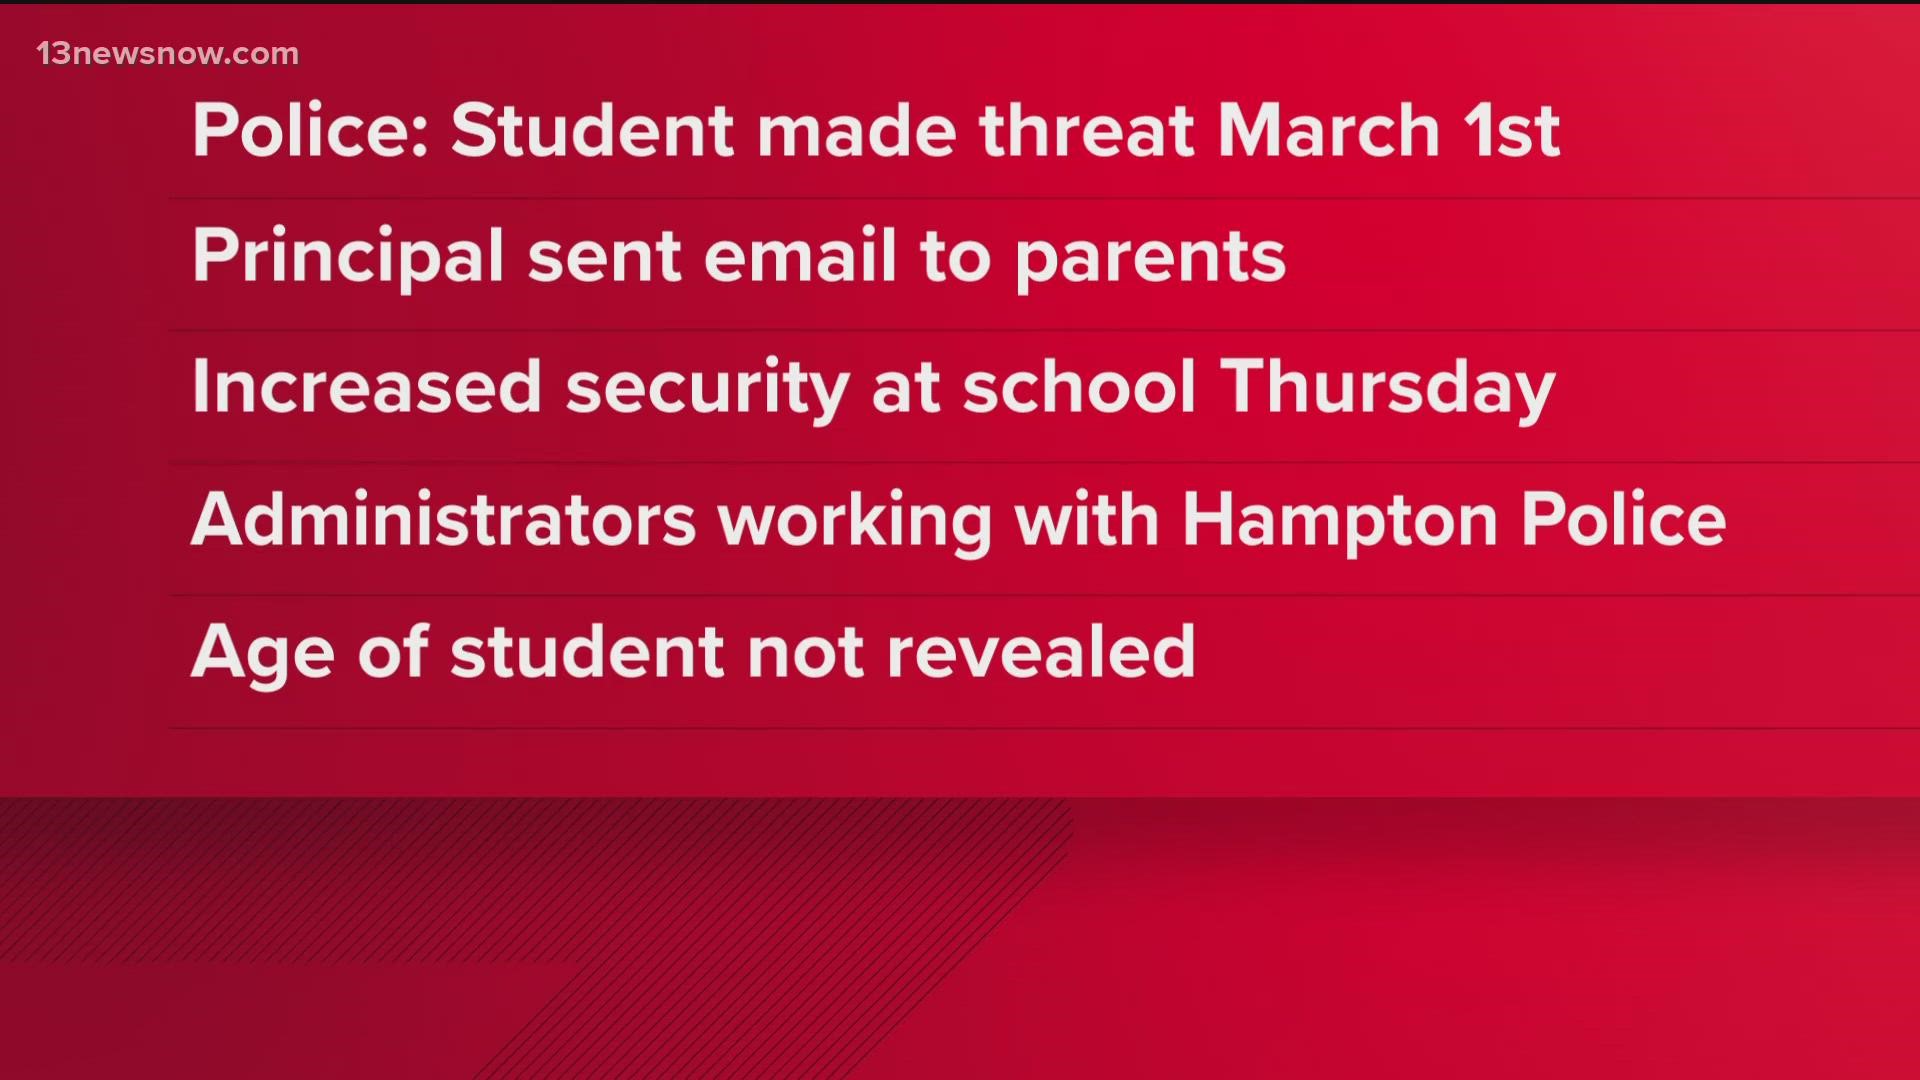 We know that the school is kindergarten through 8th grade, and that an investigation into the threat was performed.